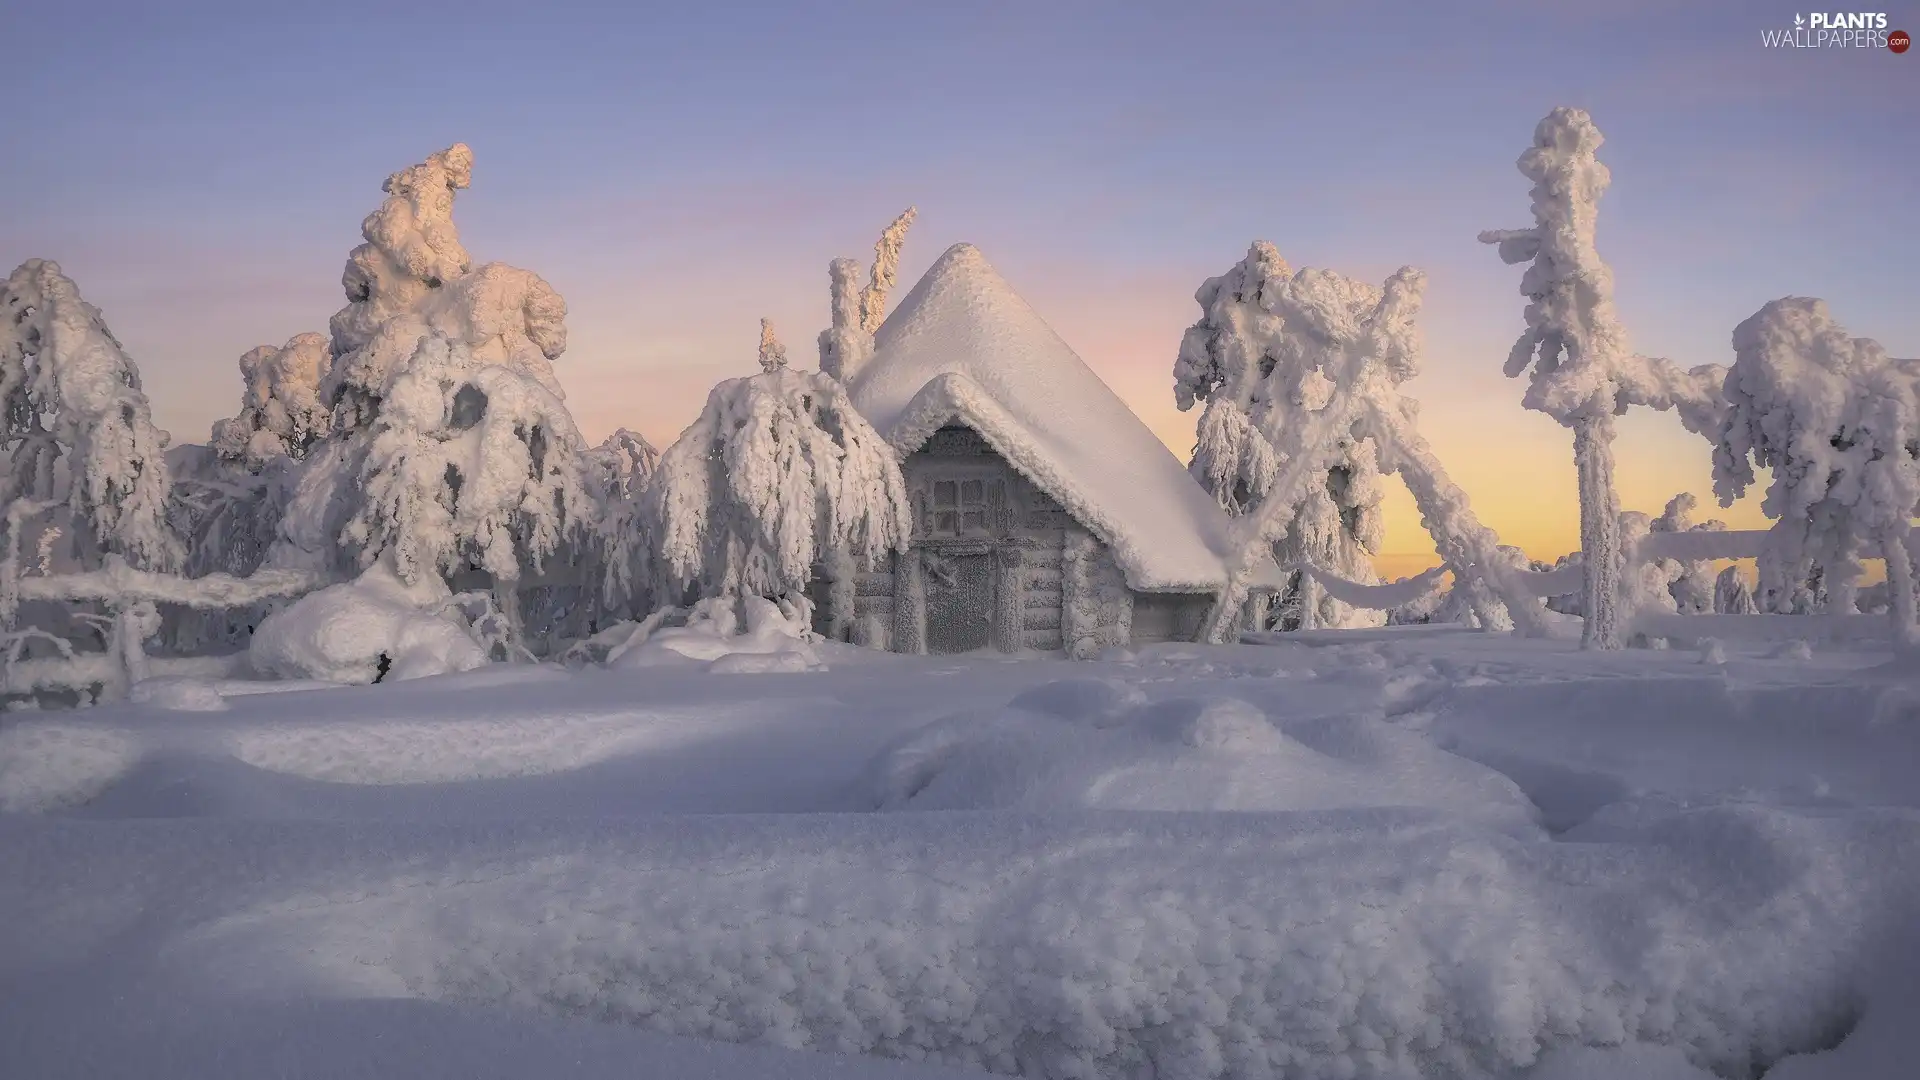 trees, snowy, drifts, house, winter, viewes, snow